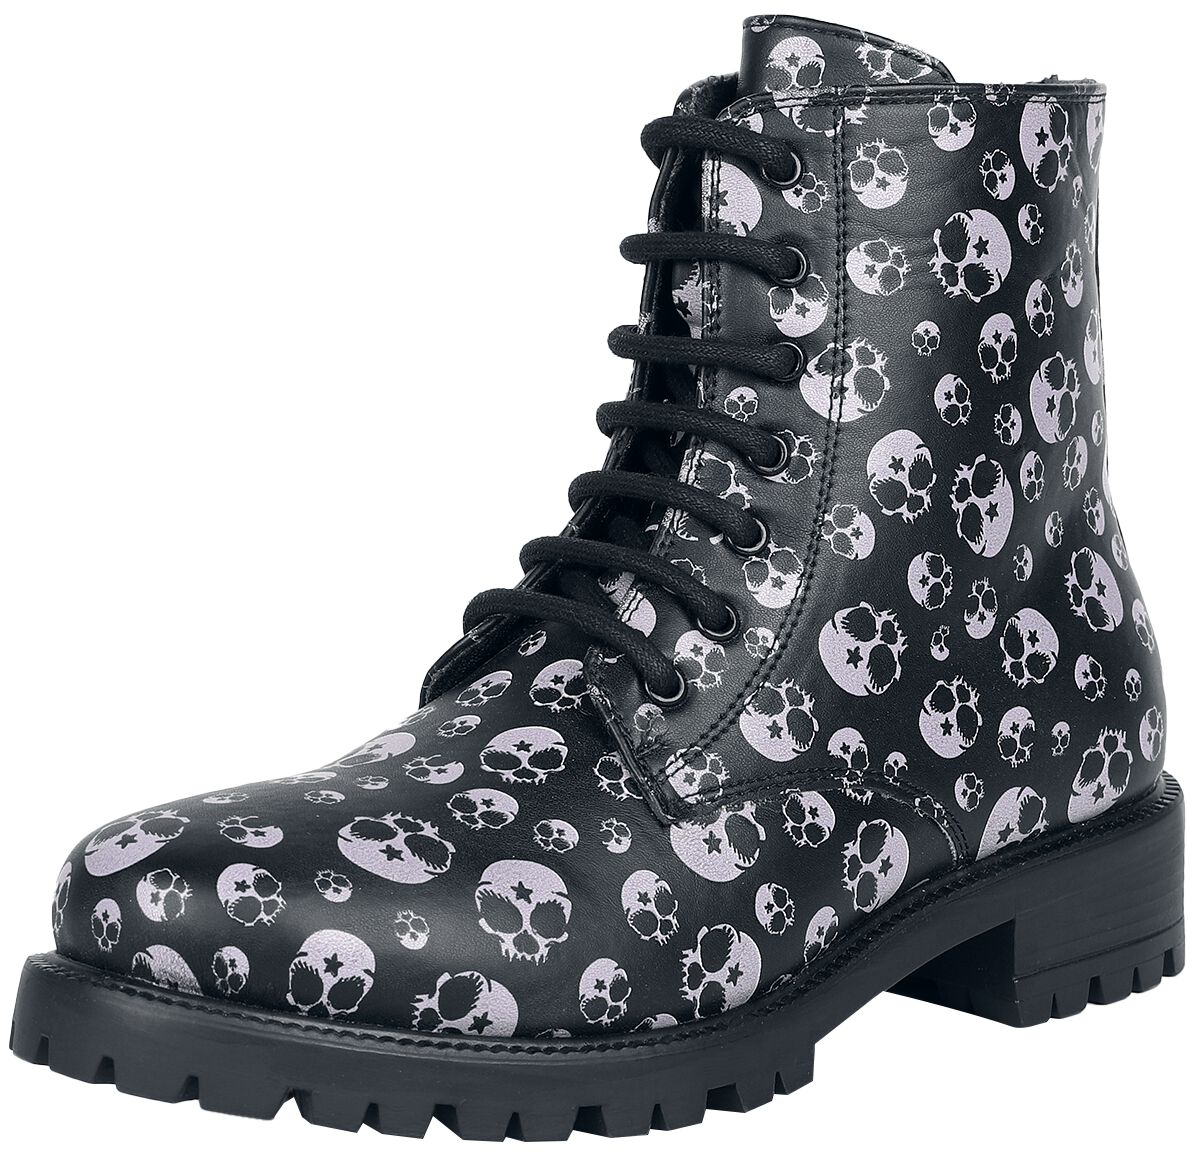 Full Volume by EMP Boots with Skull Alloverprint Boot schwarz in EU37